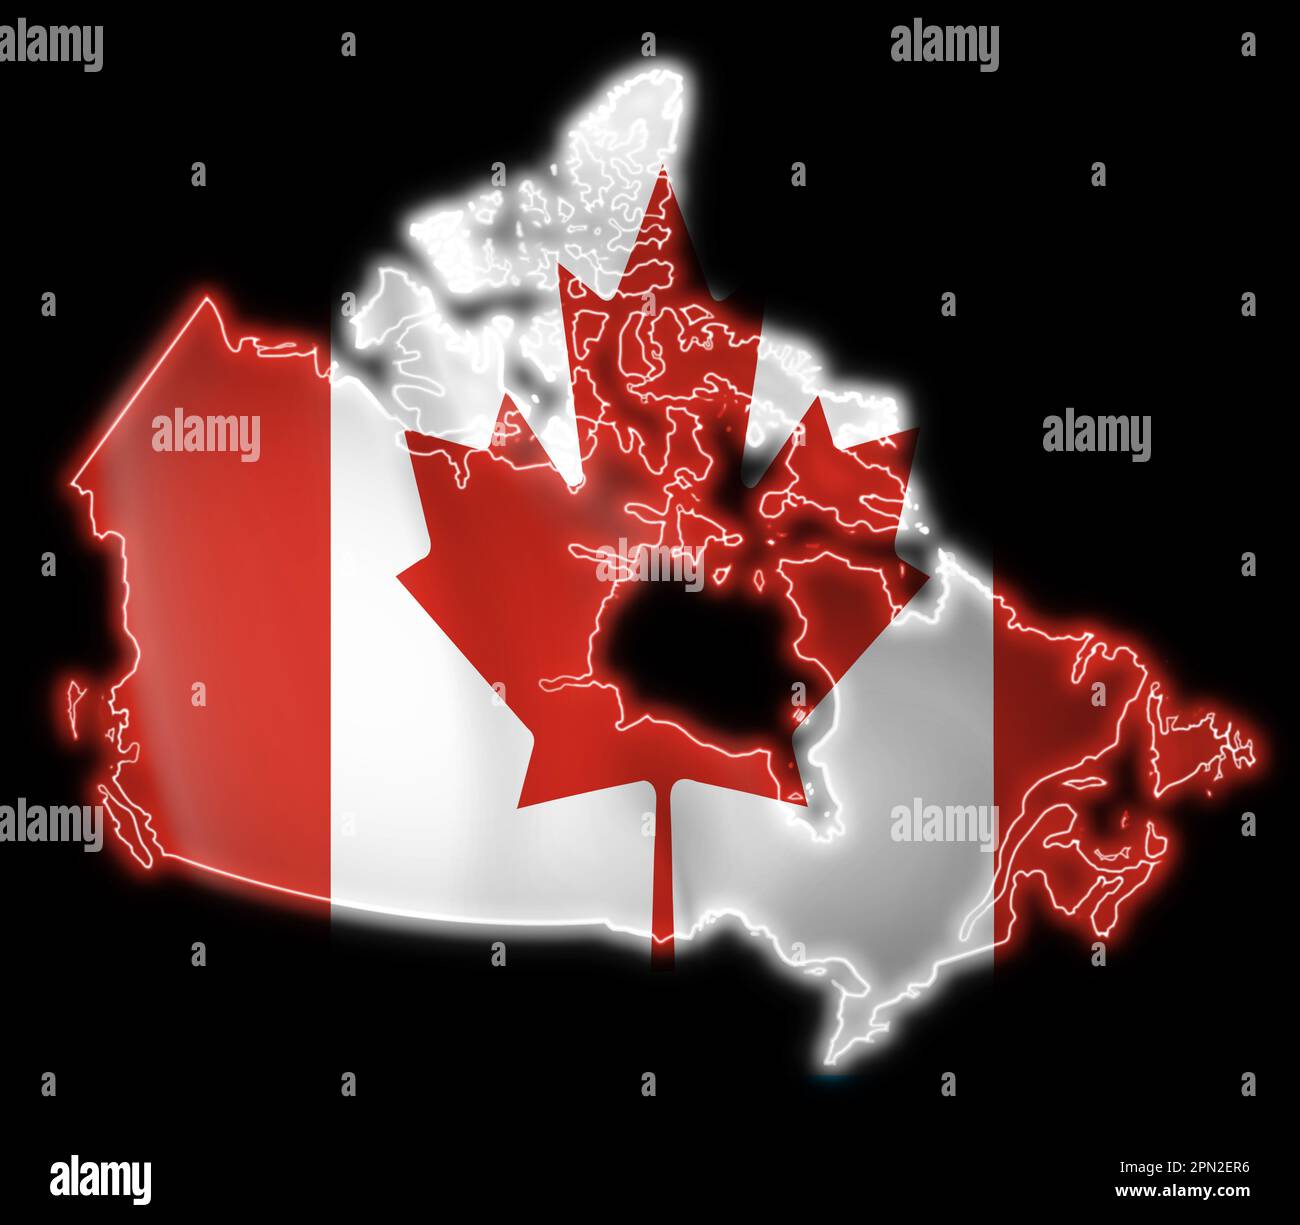 Map of Canada with Canadian flag on black background. 3D rendering. Stock Photo